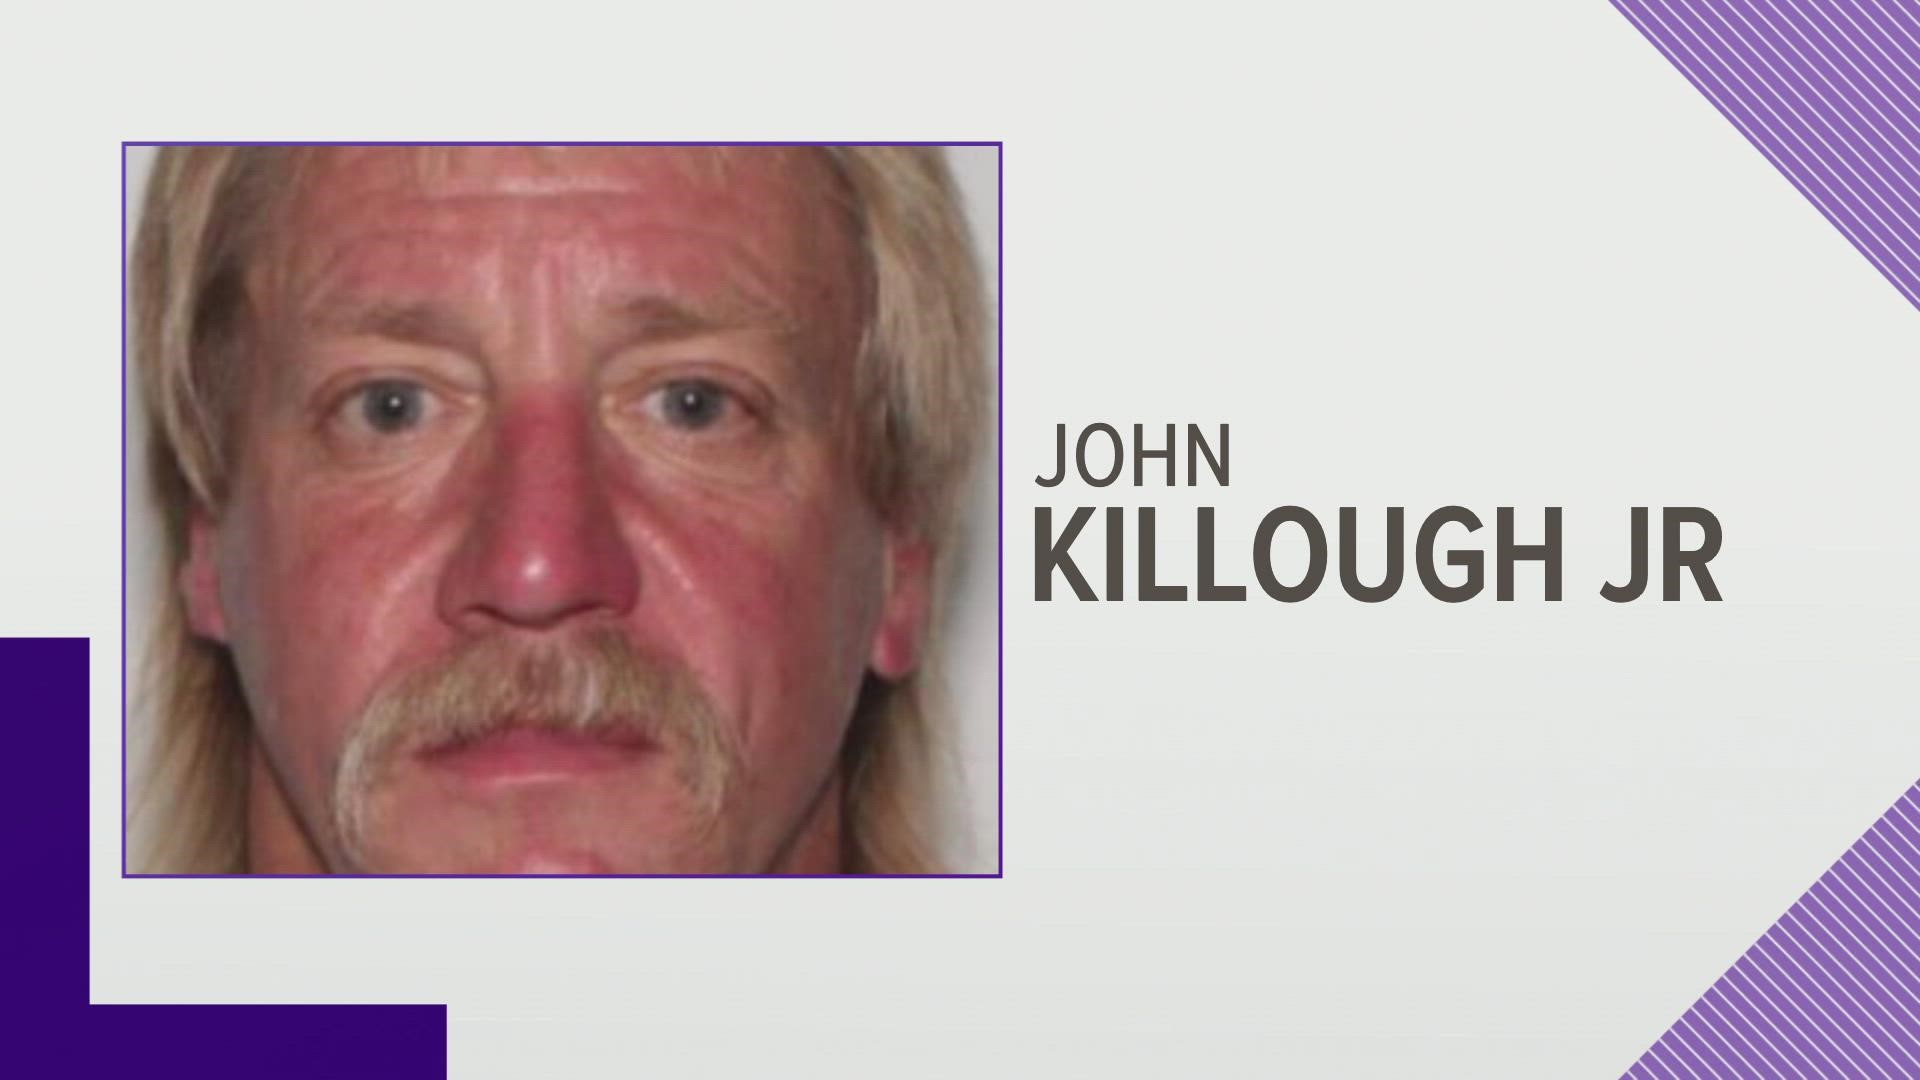 The trial for John Killough Jr. is set for April. Court documents reveal he knew he hit someone.